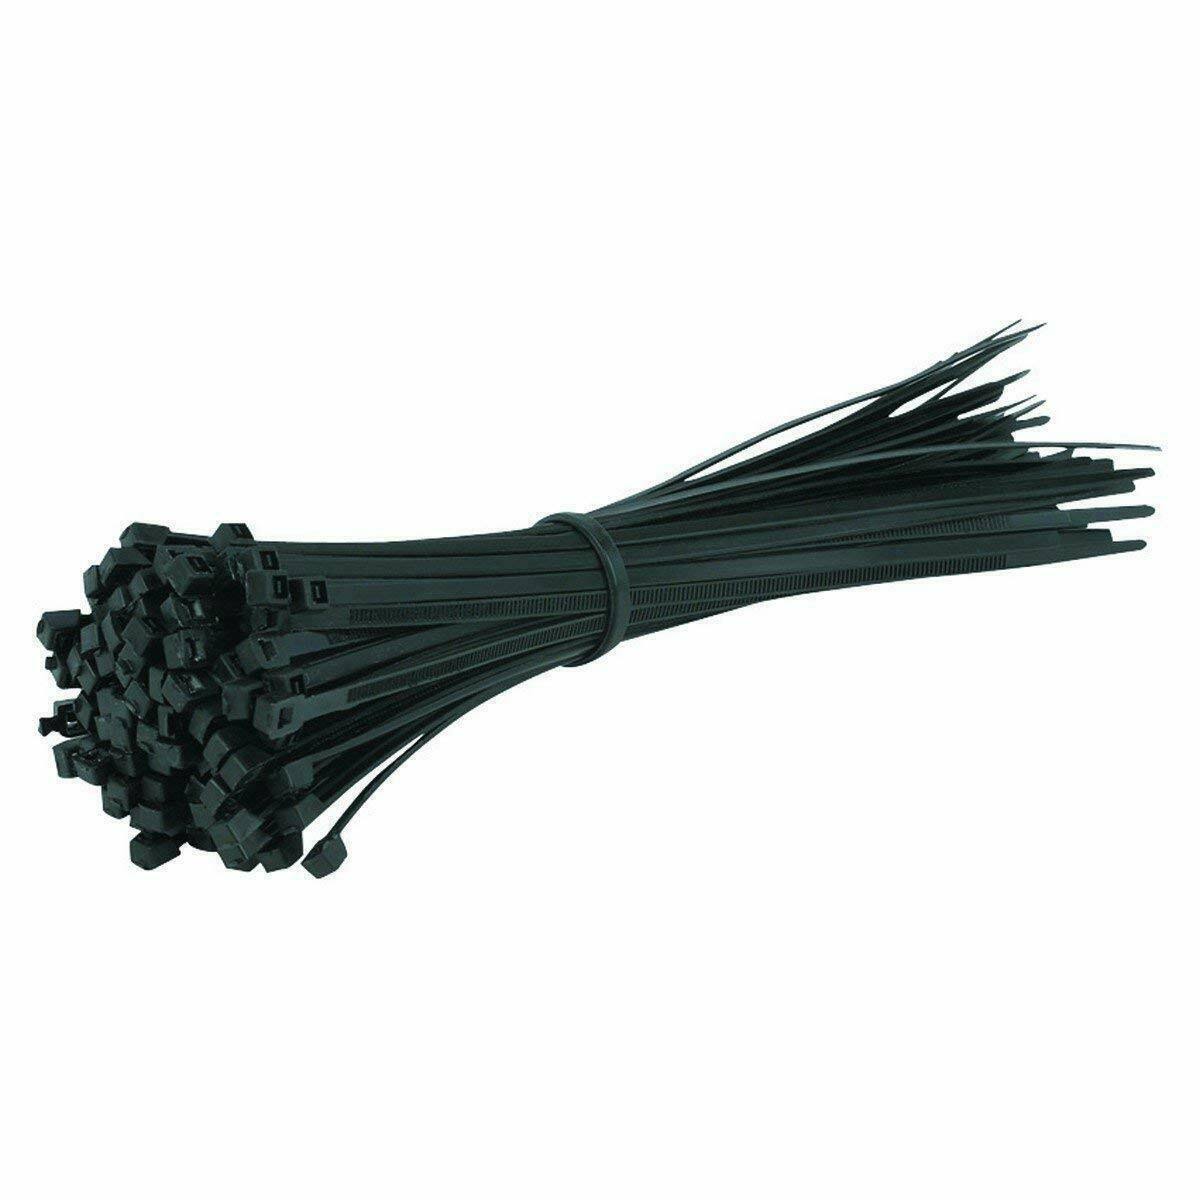 Black Cable Ties - 200mm x 3mm - Pack of 100